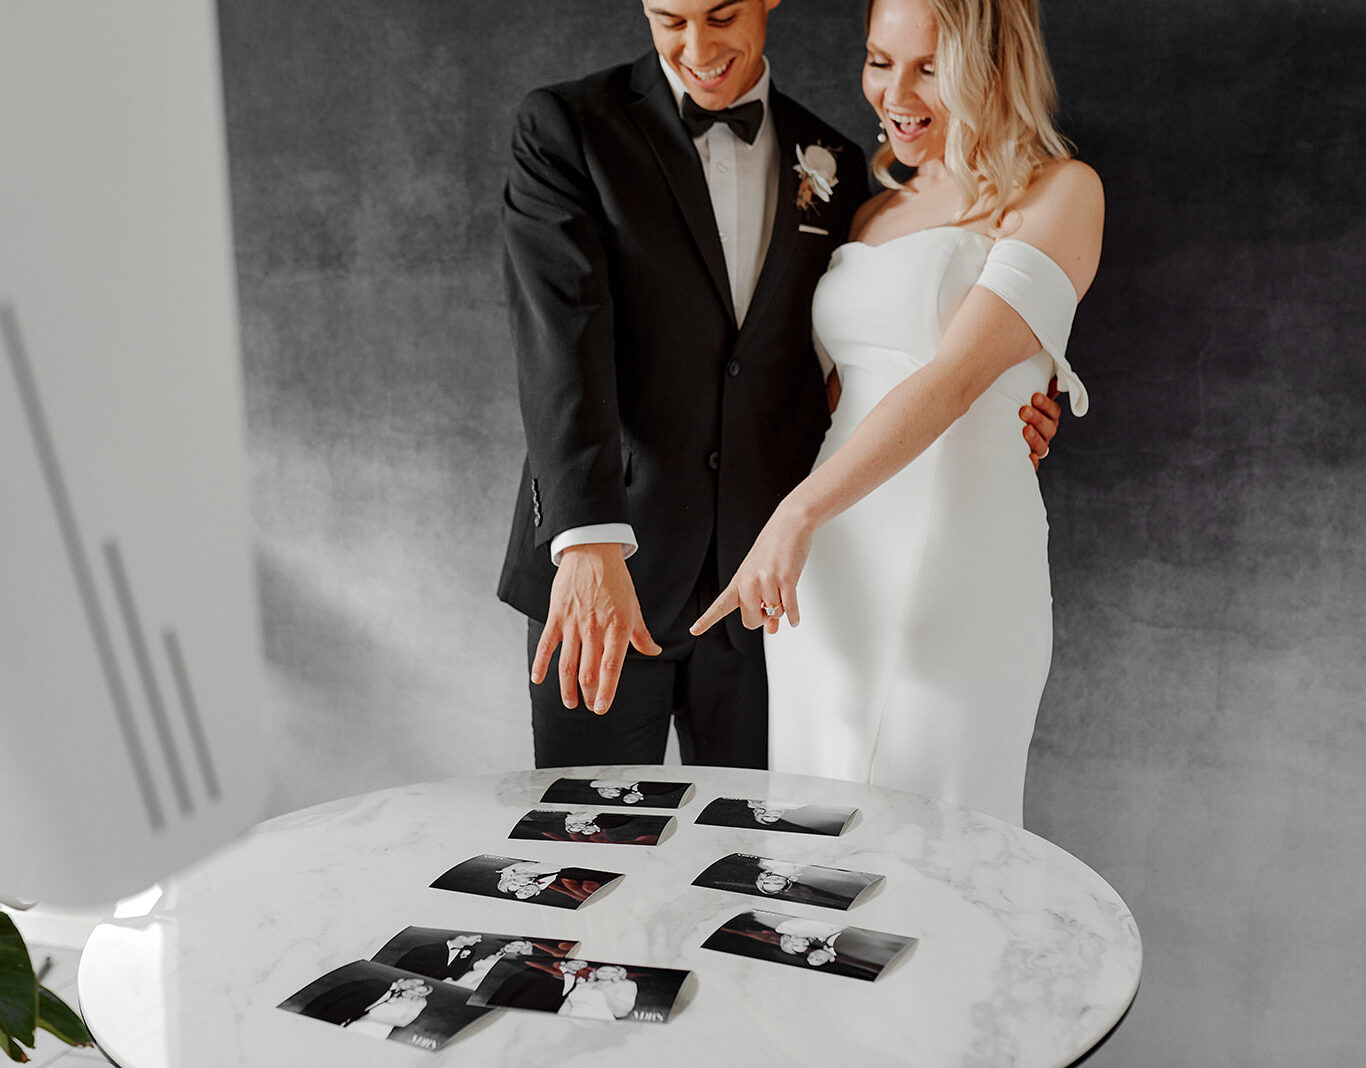 Bash by Revelle Bridal Ottawa MDRN Photo Booth Bride and Groom Looking at Printed Photographs Mementos Wedding Favours Fun Entertaining